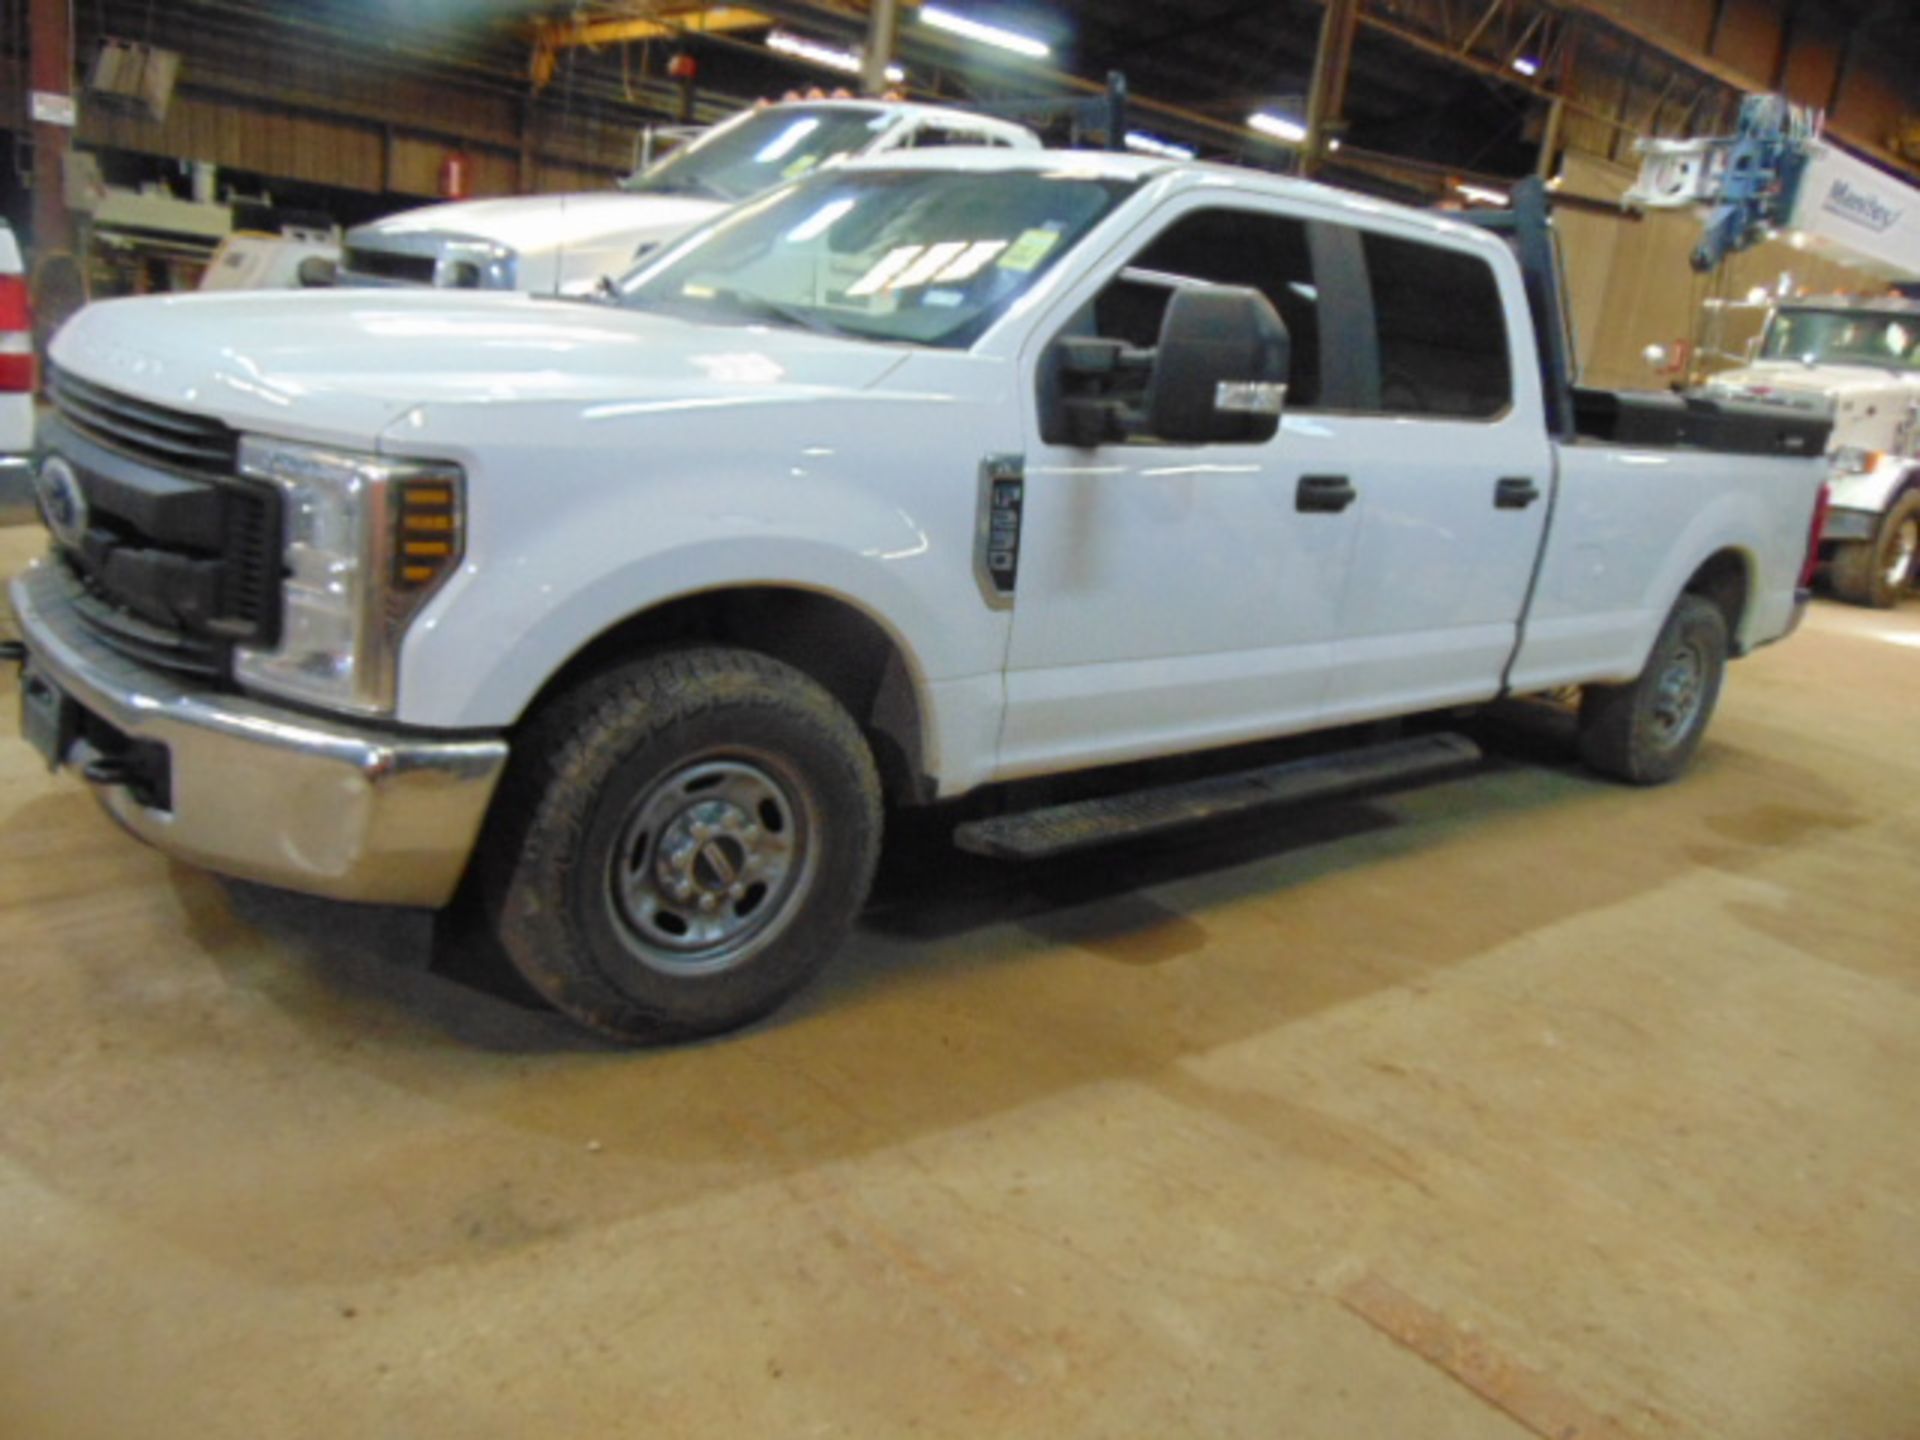 PICKUP TRUCK, FORD F-250 XL CREW CAB, new 2019, 6' bed, ODO: 159,252 miles,6.2 L gas engine, 385 HP,